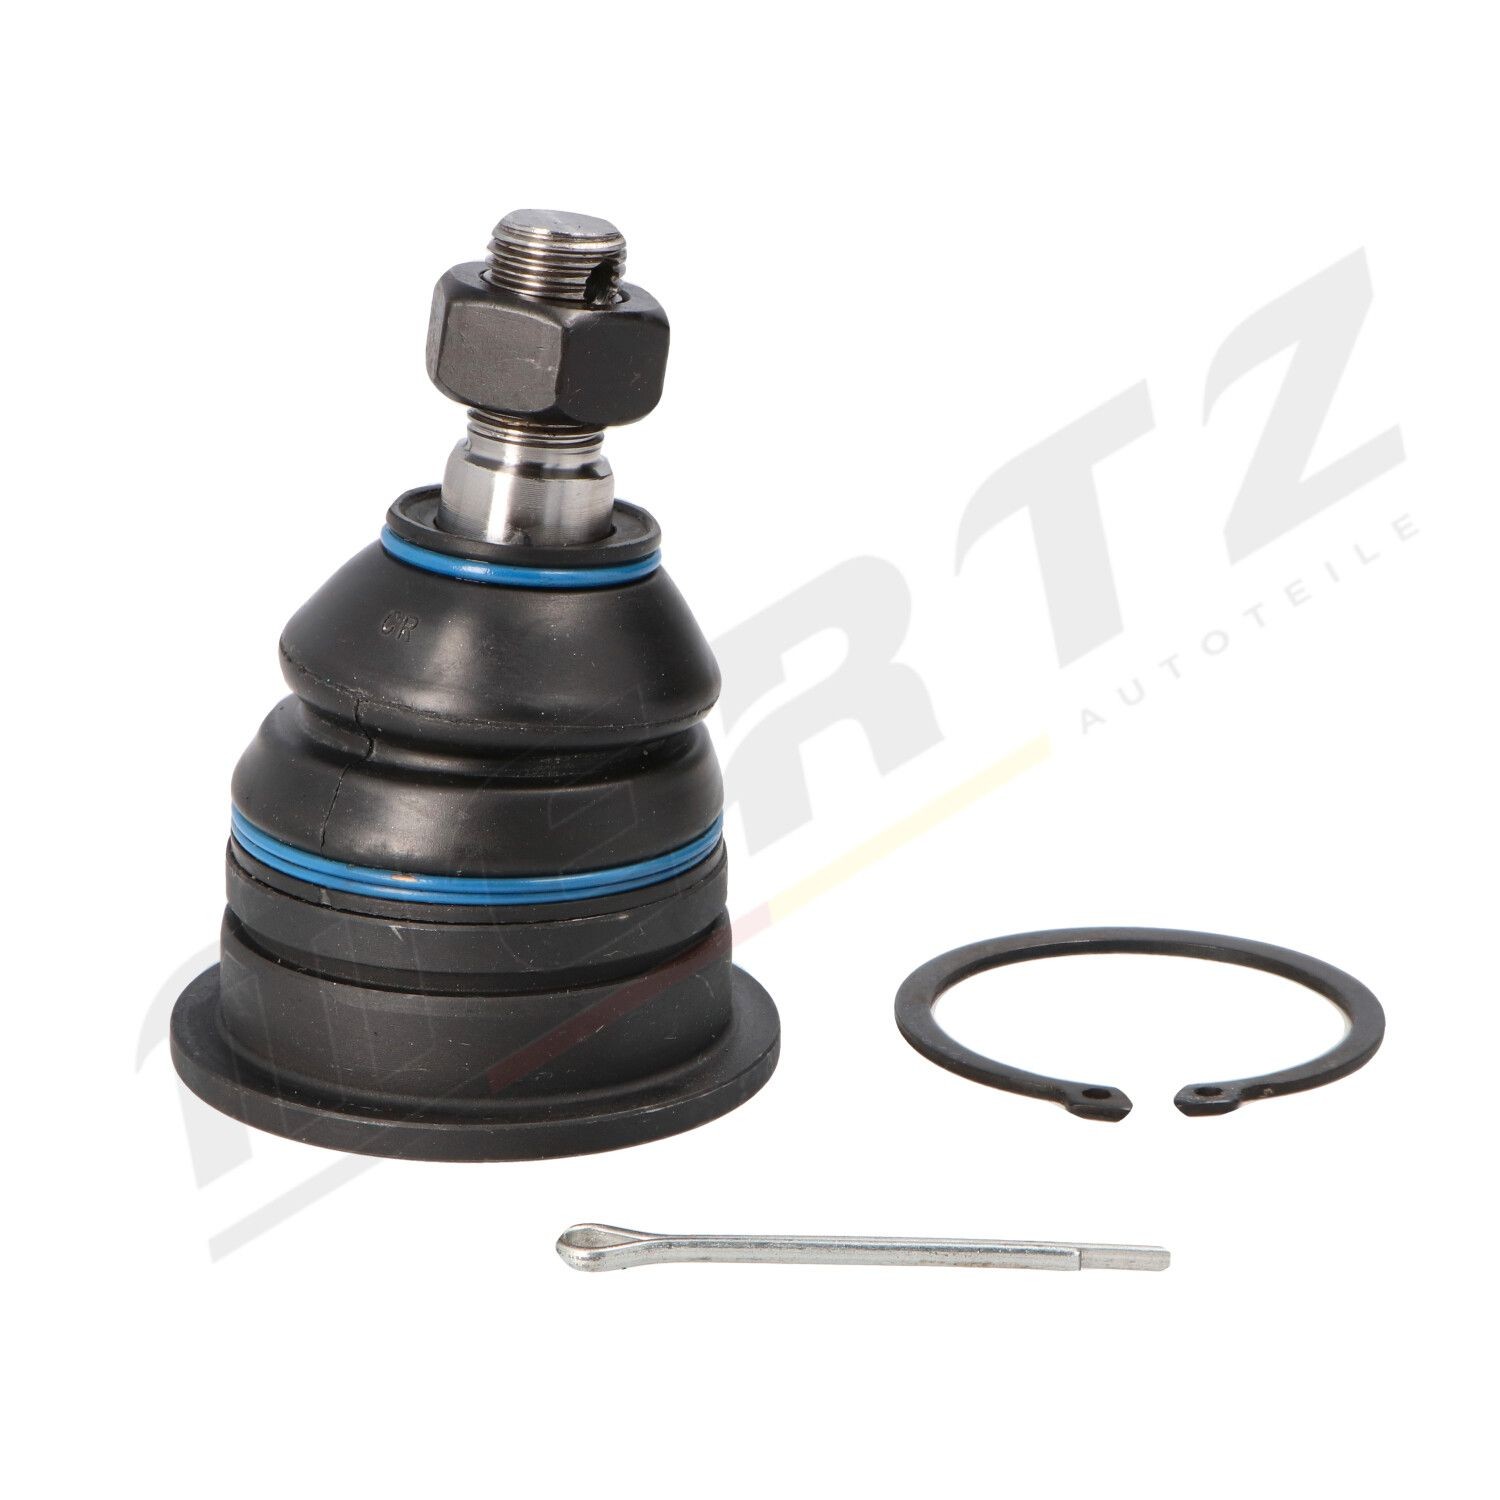 MERTZ Front Axle Left, Front Axle Right, 16mm Cone Size: 16mm, Thread Size: M14x1,5 Suspension ball joint M-S0998 buy